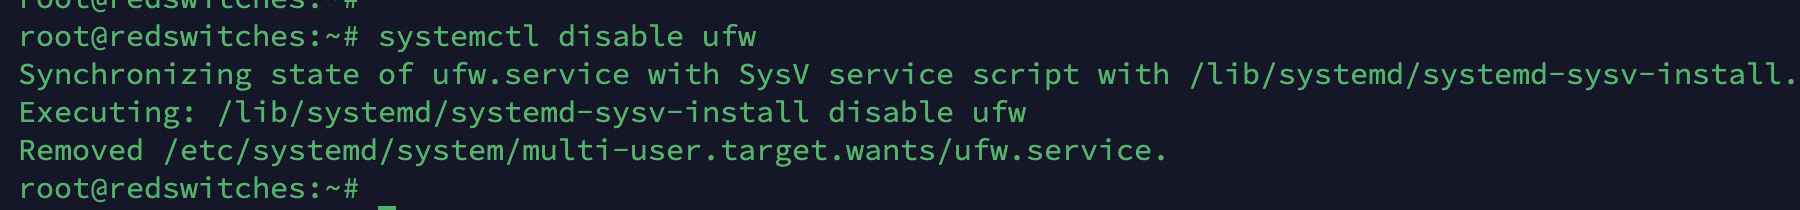 systemctl disable ufw